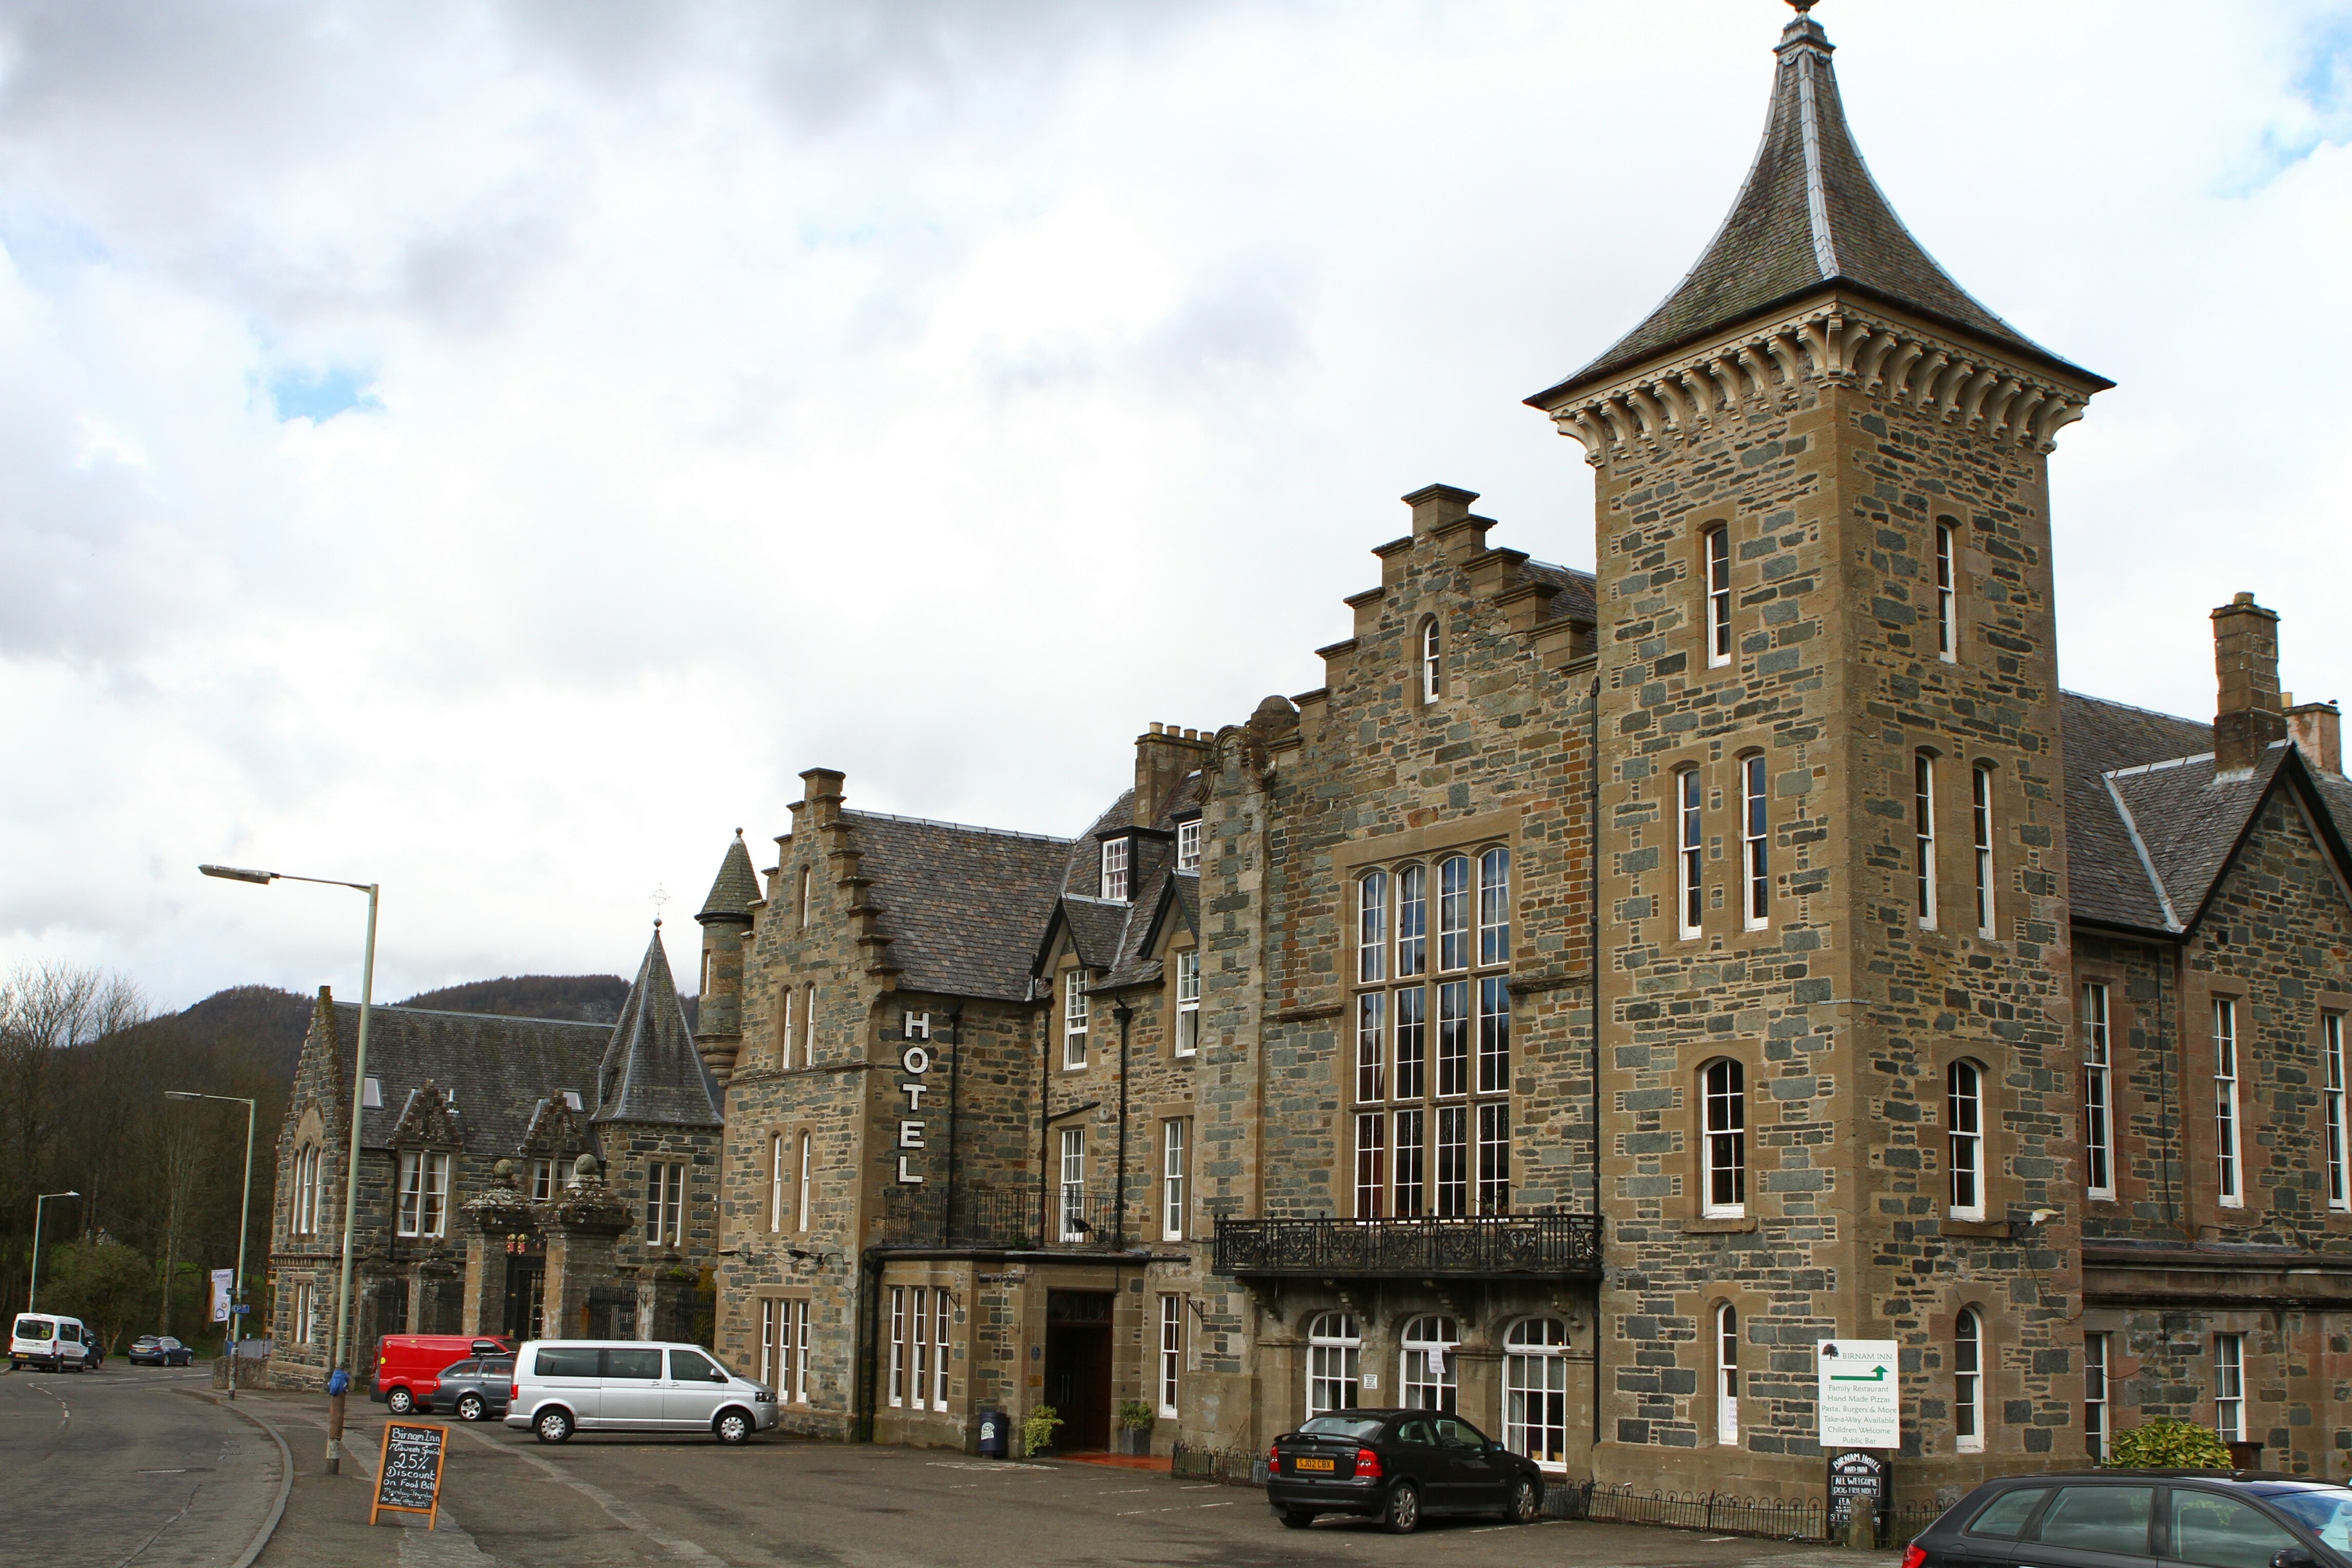 The Birnam Hotel is among the sites chosen.